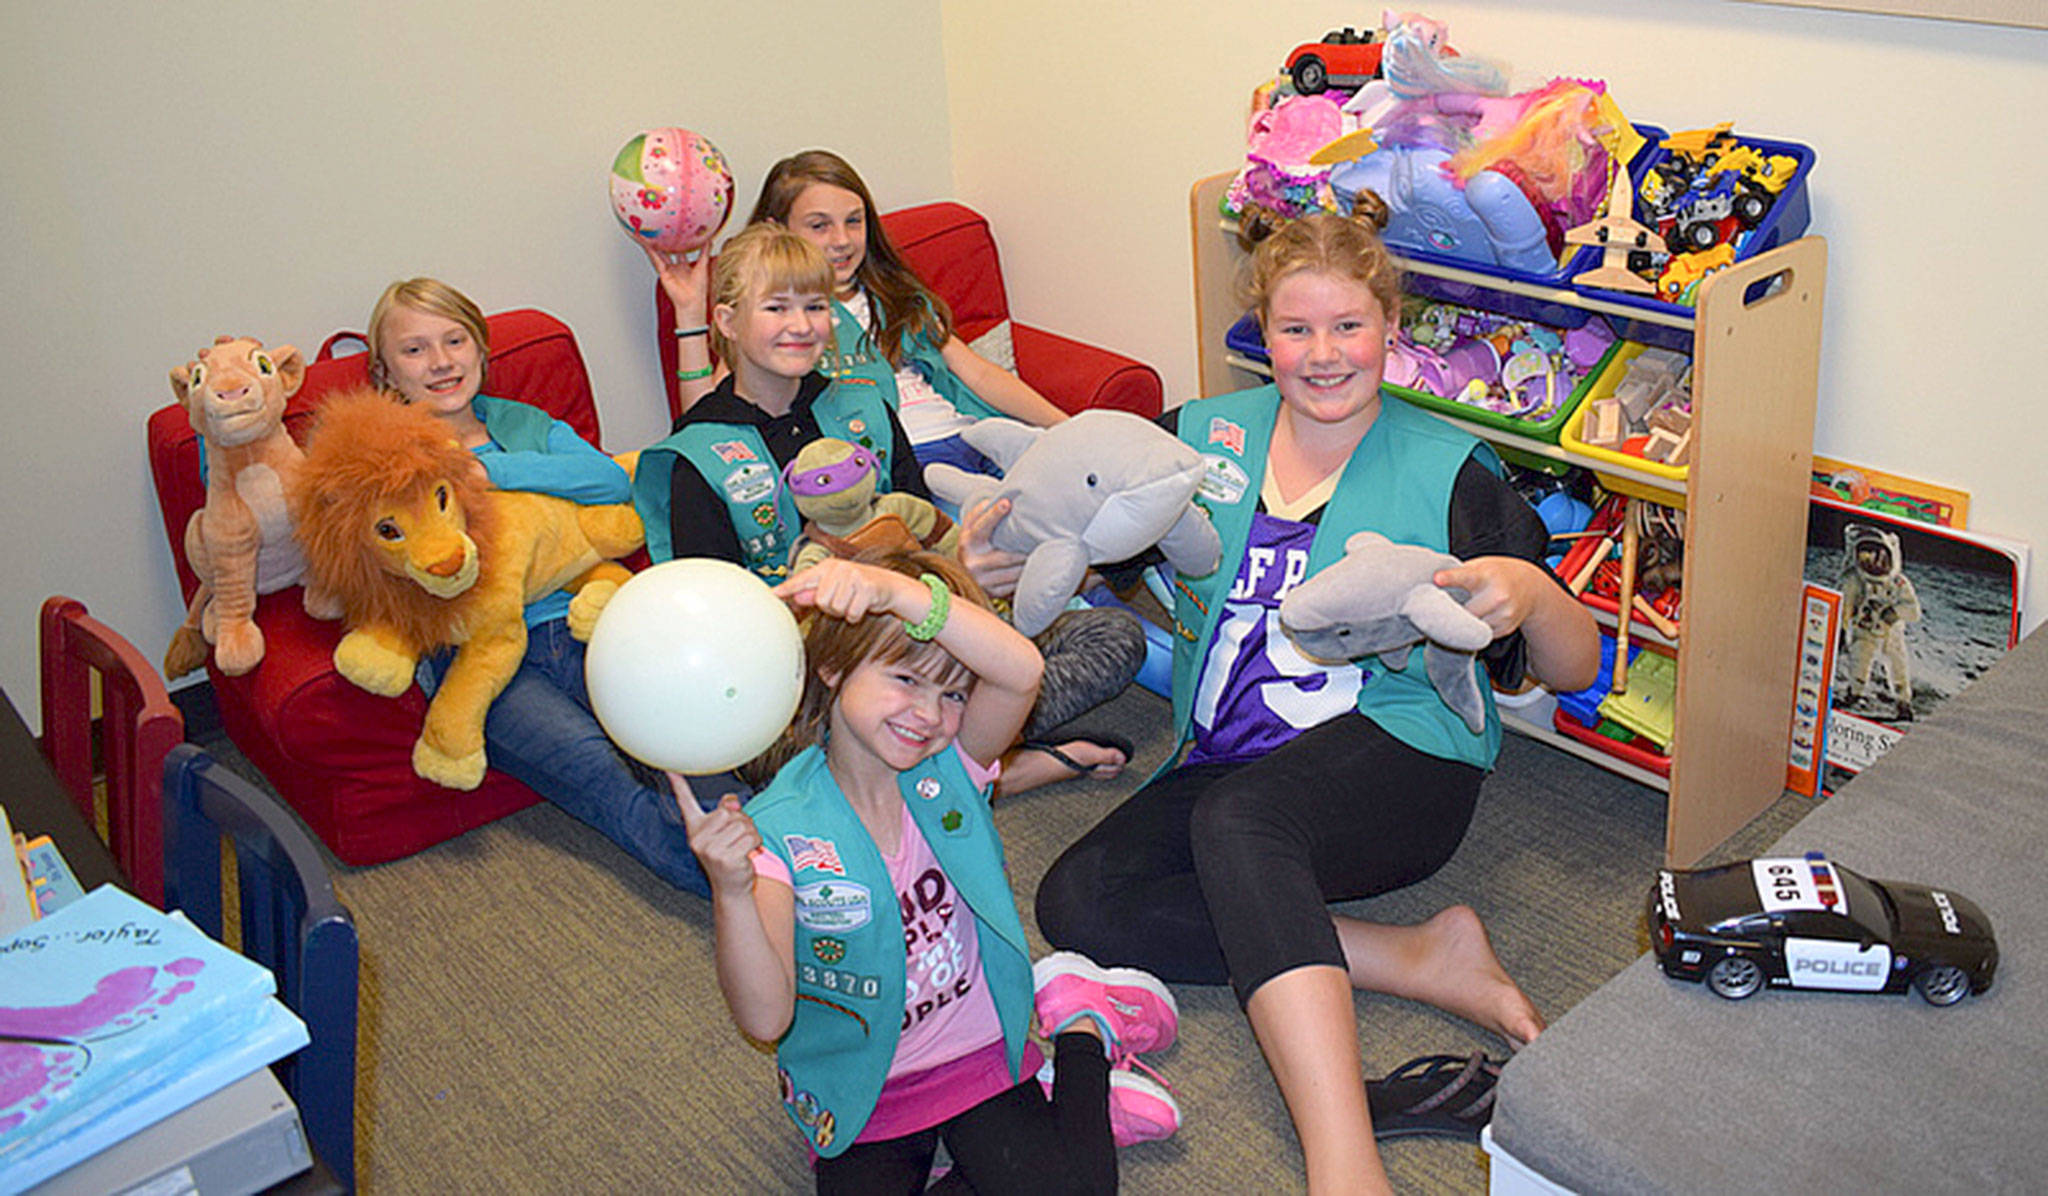 Girl Scouts with Sequim Troop 43870, from left, Johanna Beckerley-Kohl, Sophie Morton, Taylor Heyting, Caydence Barnett, and Paige Krzyworz, take a moment for a photo-op as they remodel the child-friendly space in the Sequim Police Department called Cozy Cove. Photos courtesy of Heidi Krzyworz